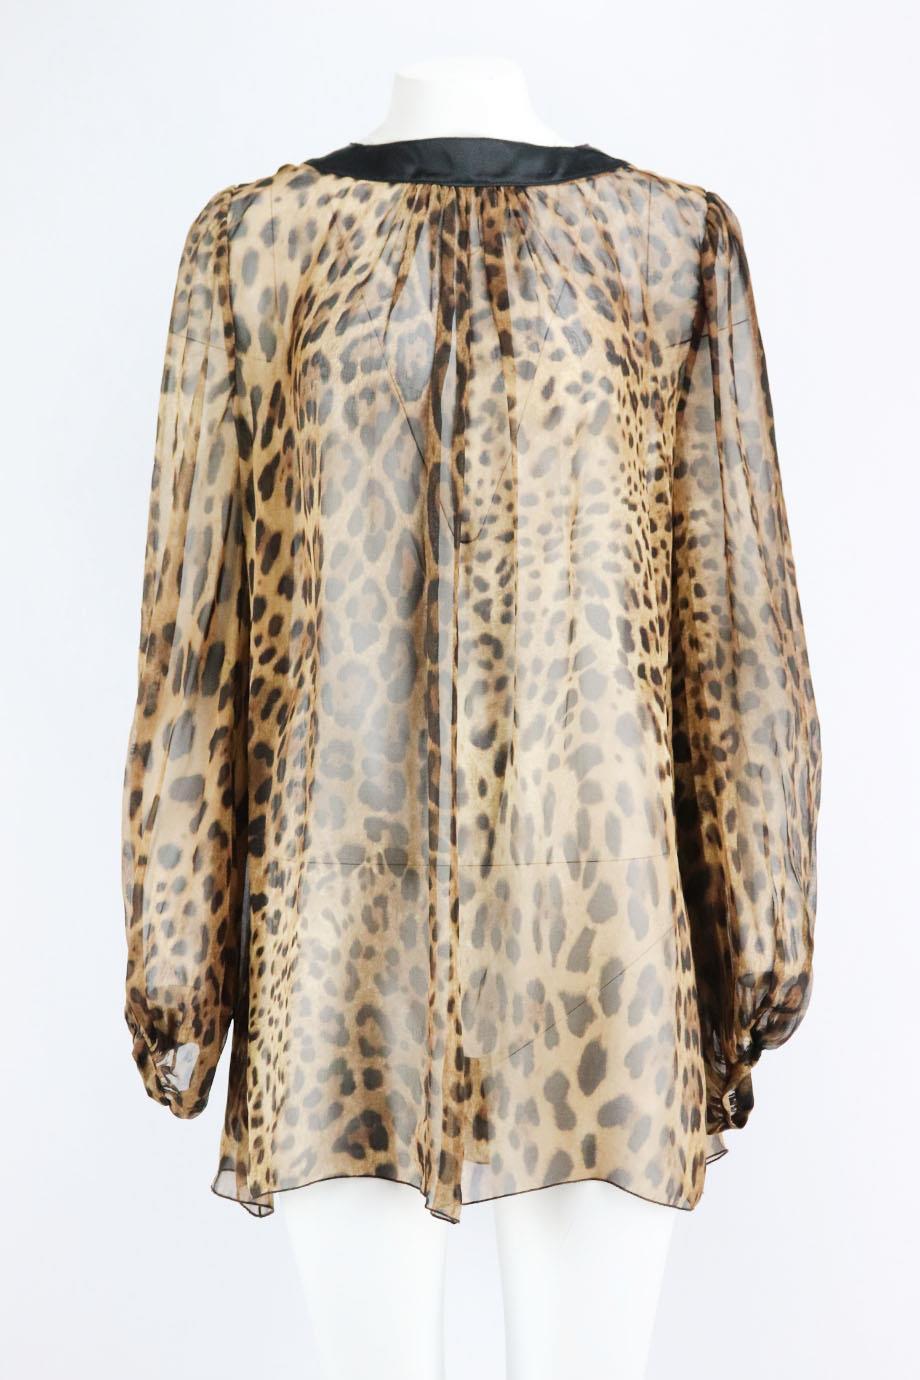 Dolce & Gabbana leopard print silk top. Brown, beige and black. Long sleeve, v-neck. Slips on. 100% Silk. Size: IT 44 (UK 12, US 8, FR 40). Bust: 46 in. Waist: 49 in. Hips: 74 in. Length: 31 in. Very good condition - No sign of wear; see pictures.
